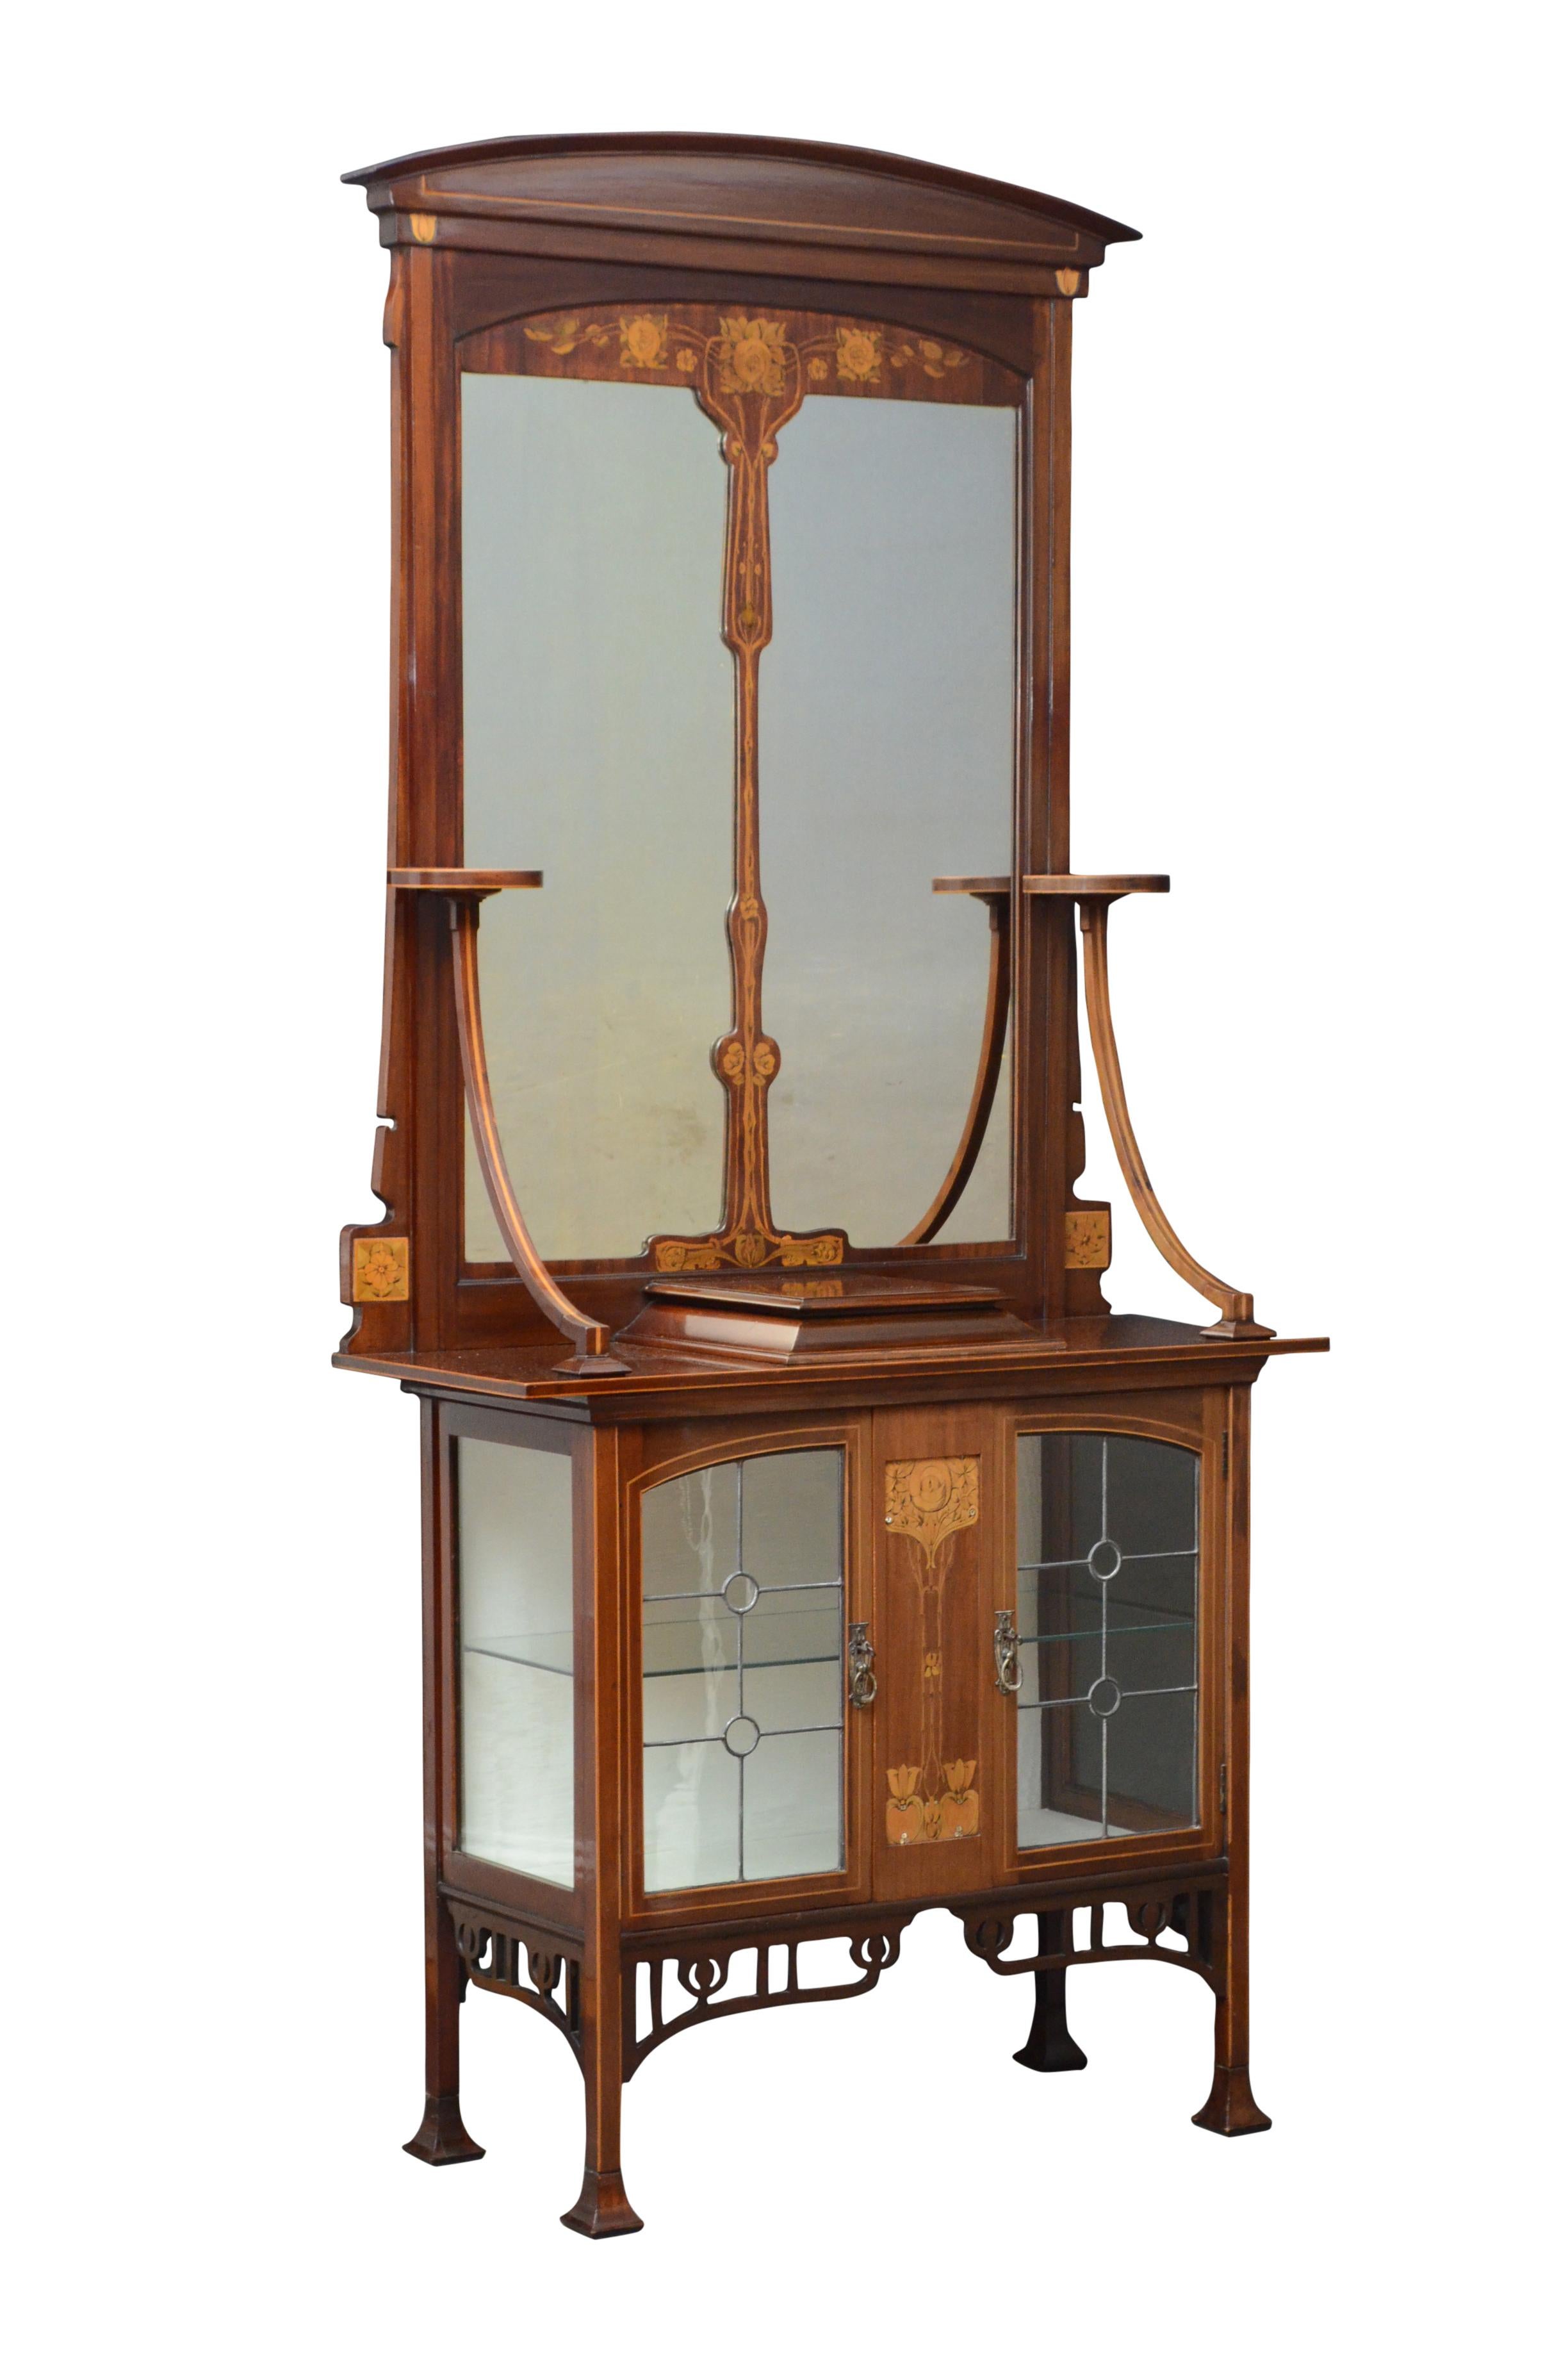 K0450 stylish Art Nouveau mahogany and marquetry hall cabinet with arched cresting above divided mirror flanked by a pair of circular platforms on downswept supports, the projecting base having floral inlaid centre panel, outlined in boxwood and